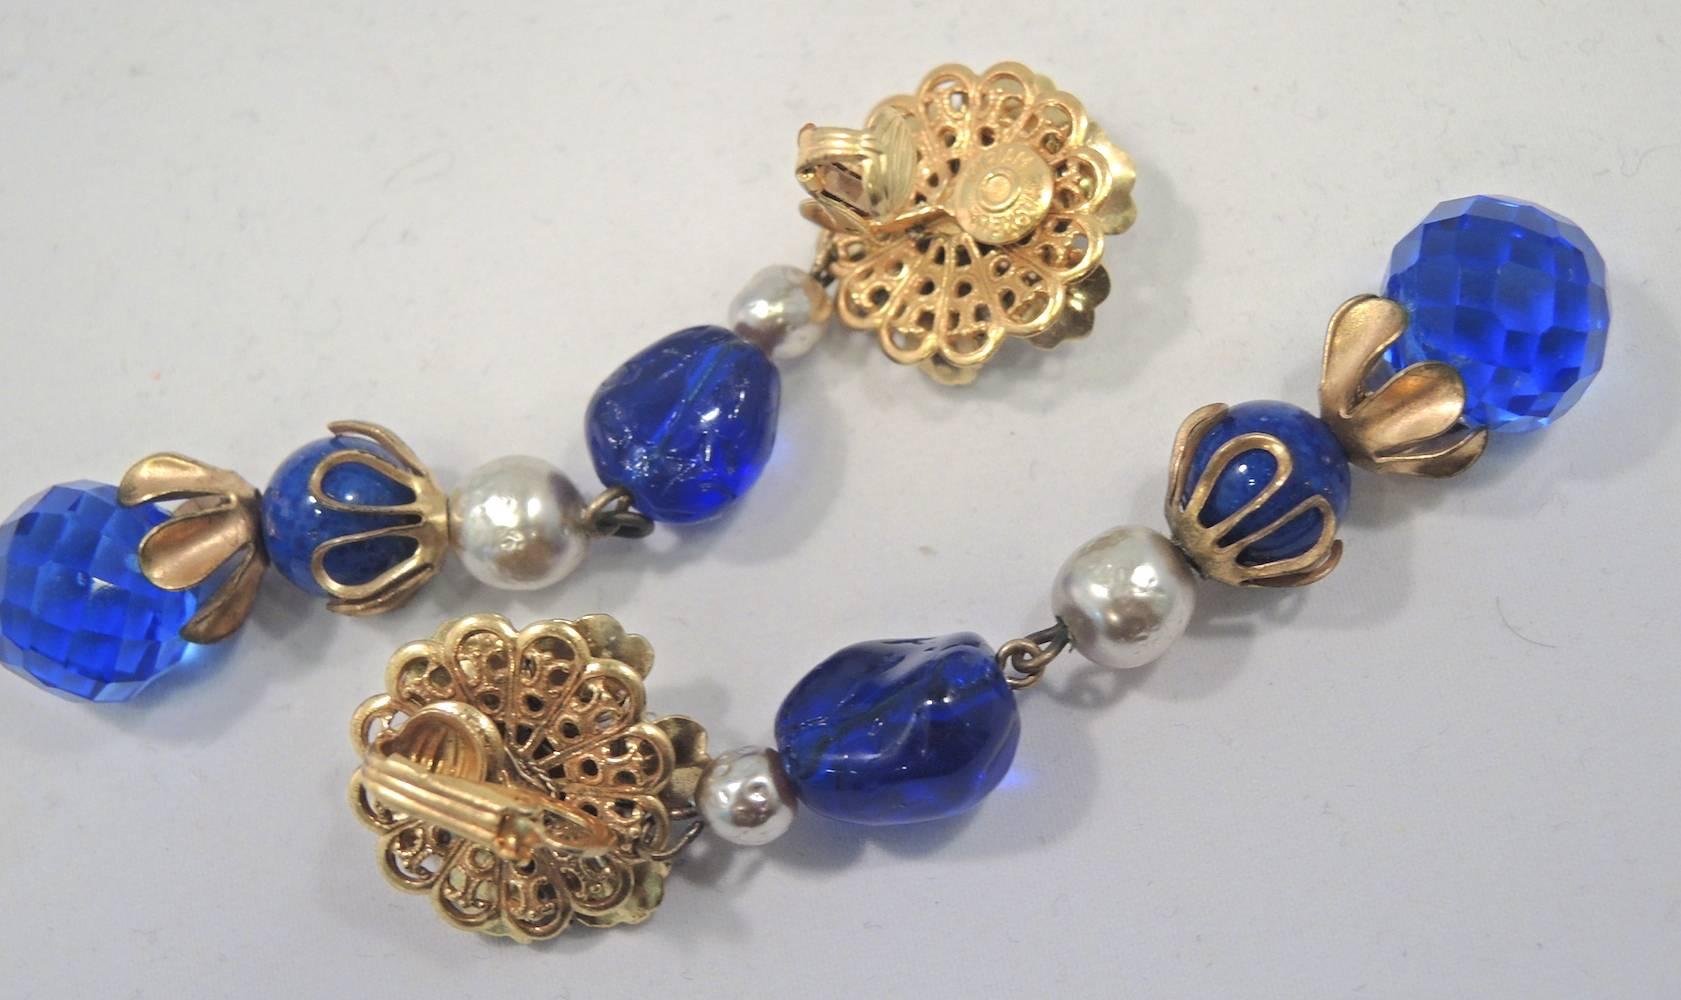 Women's Vintage Long, Rare Signed Miriam Haskell Blue & Faux Pearl Earrings